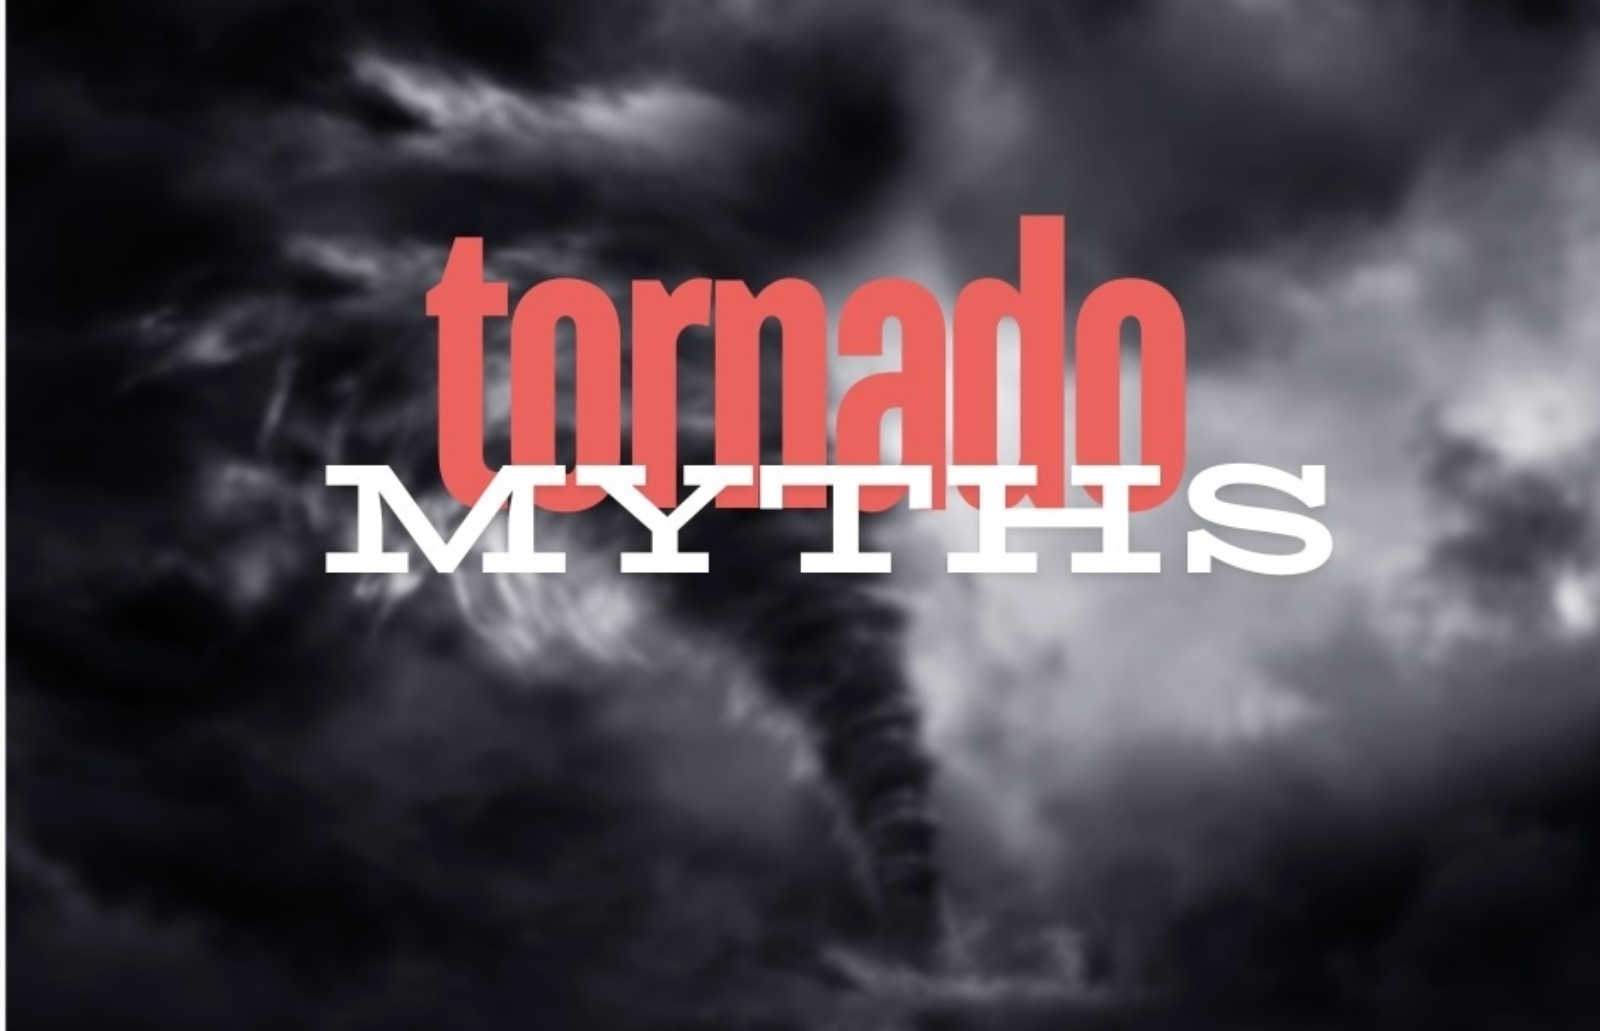 Tornado Myths and Misconceptions